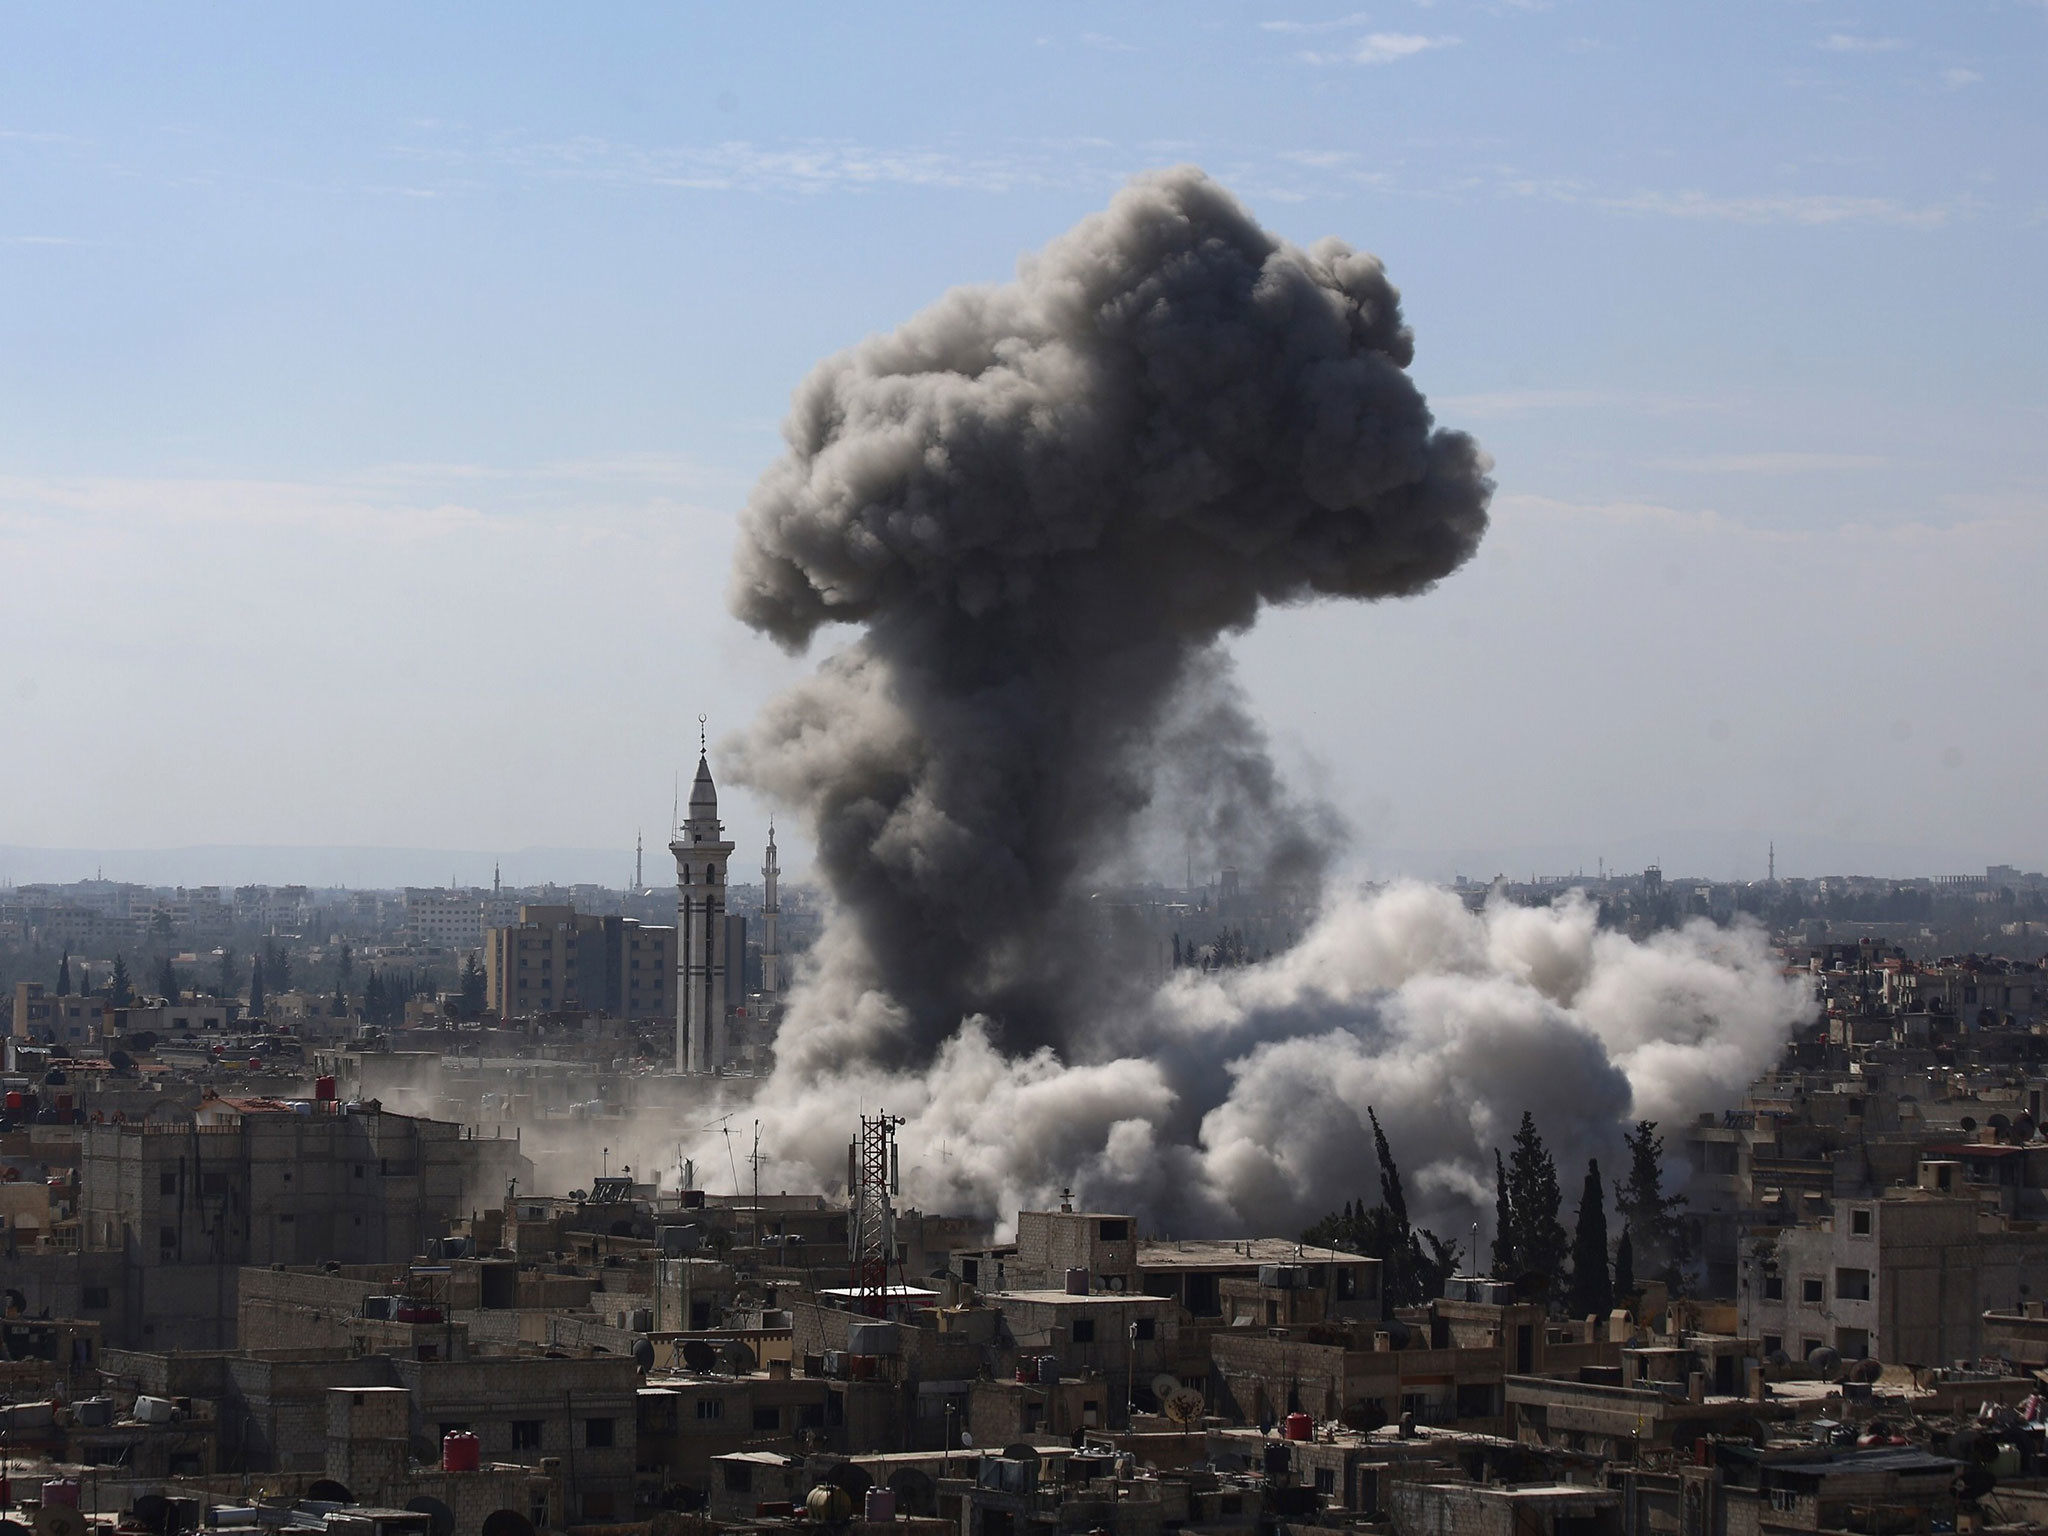 2048x1536 Syrian civil war timeline: Tracking five years of conflict | The Independent